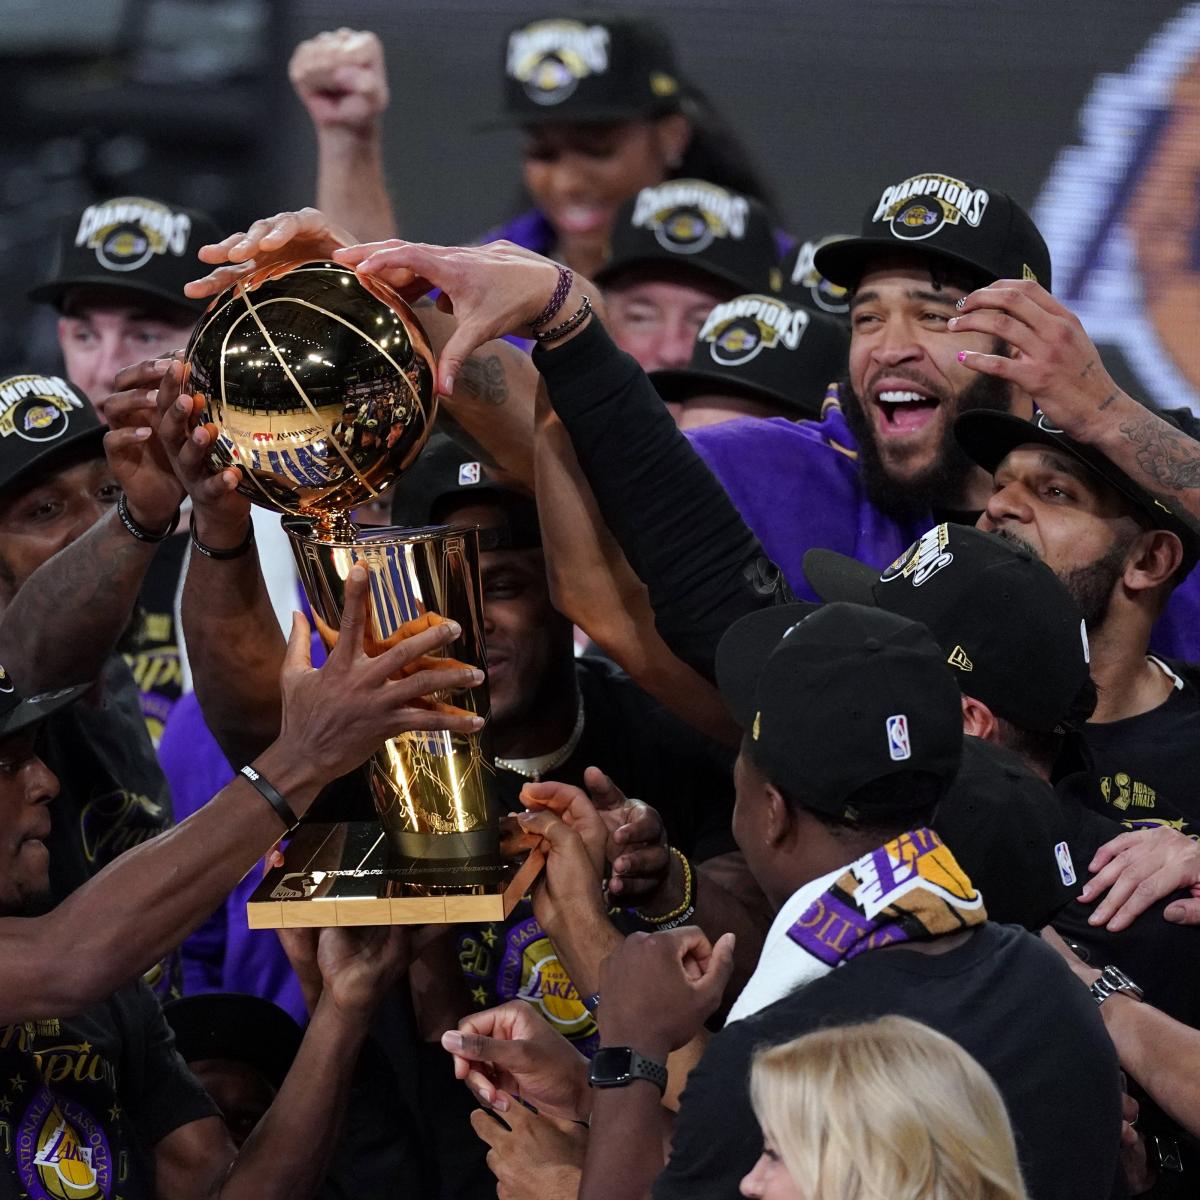 Detailed view of Los Angeles Lakers 2020 NBA Finals championship